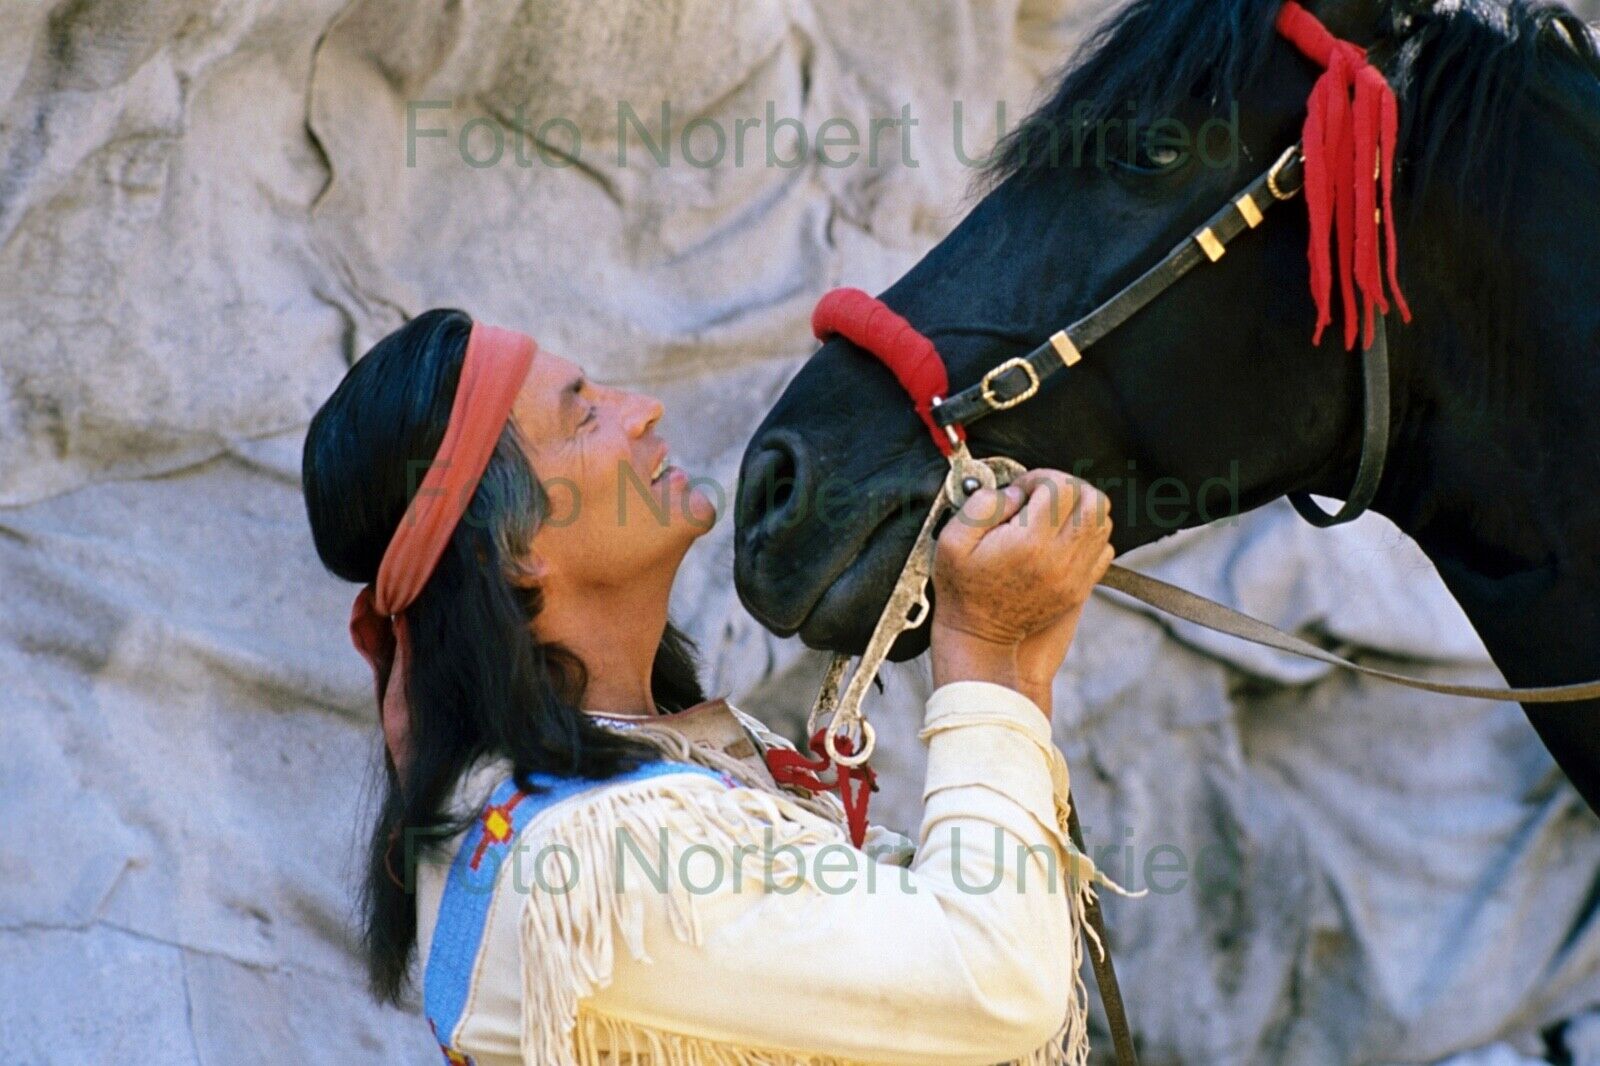 Pierre Brice Horse 20 X 30 CM Photo Poster painting Not Signed Without Autograph Nr 2-69